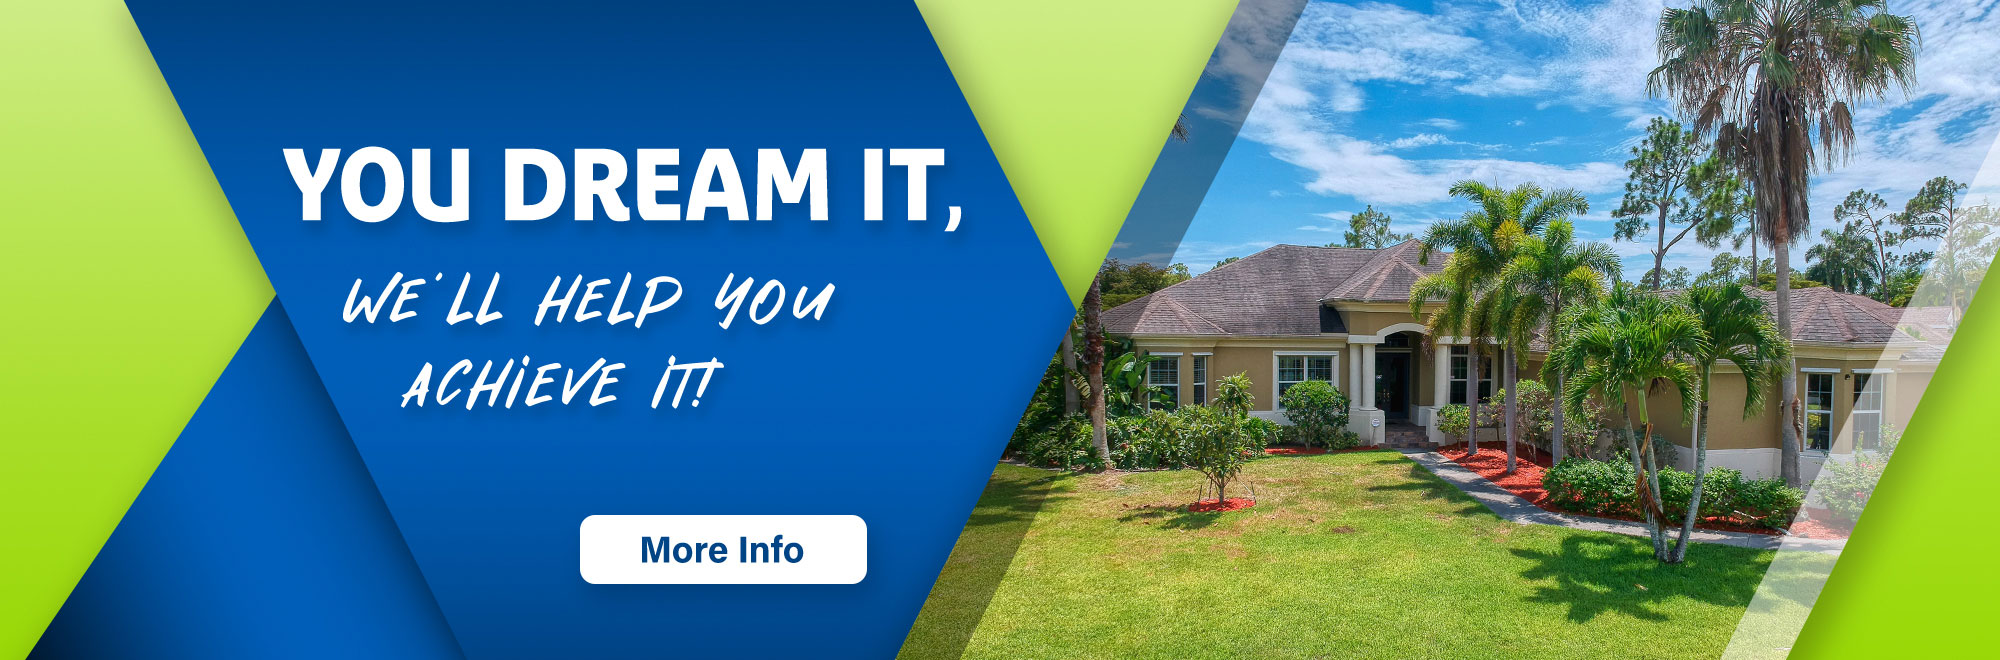 You Dream It We'll Help you Achieve it. Learn more about our mortgage products.